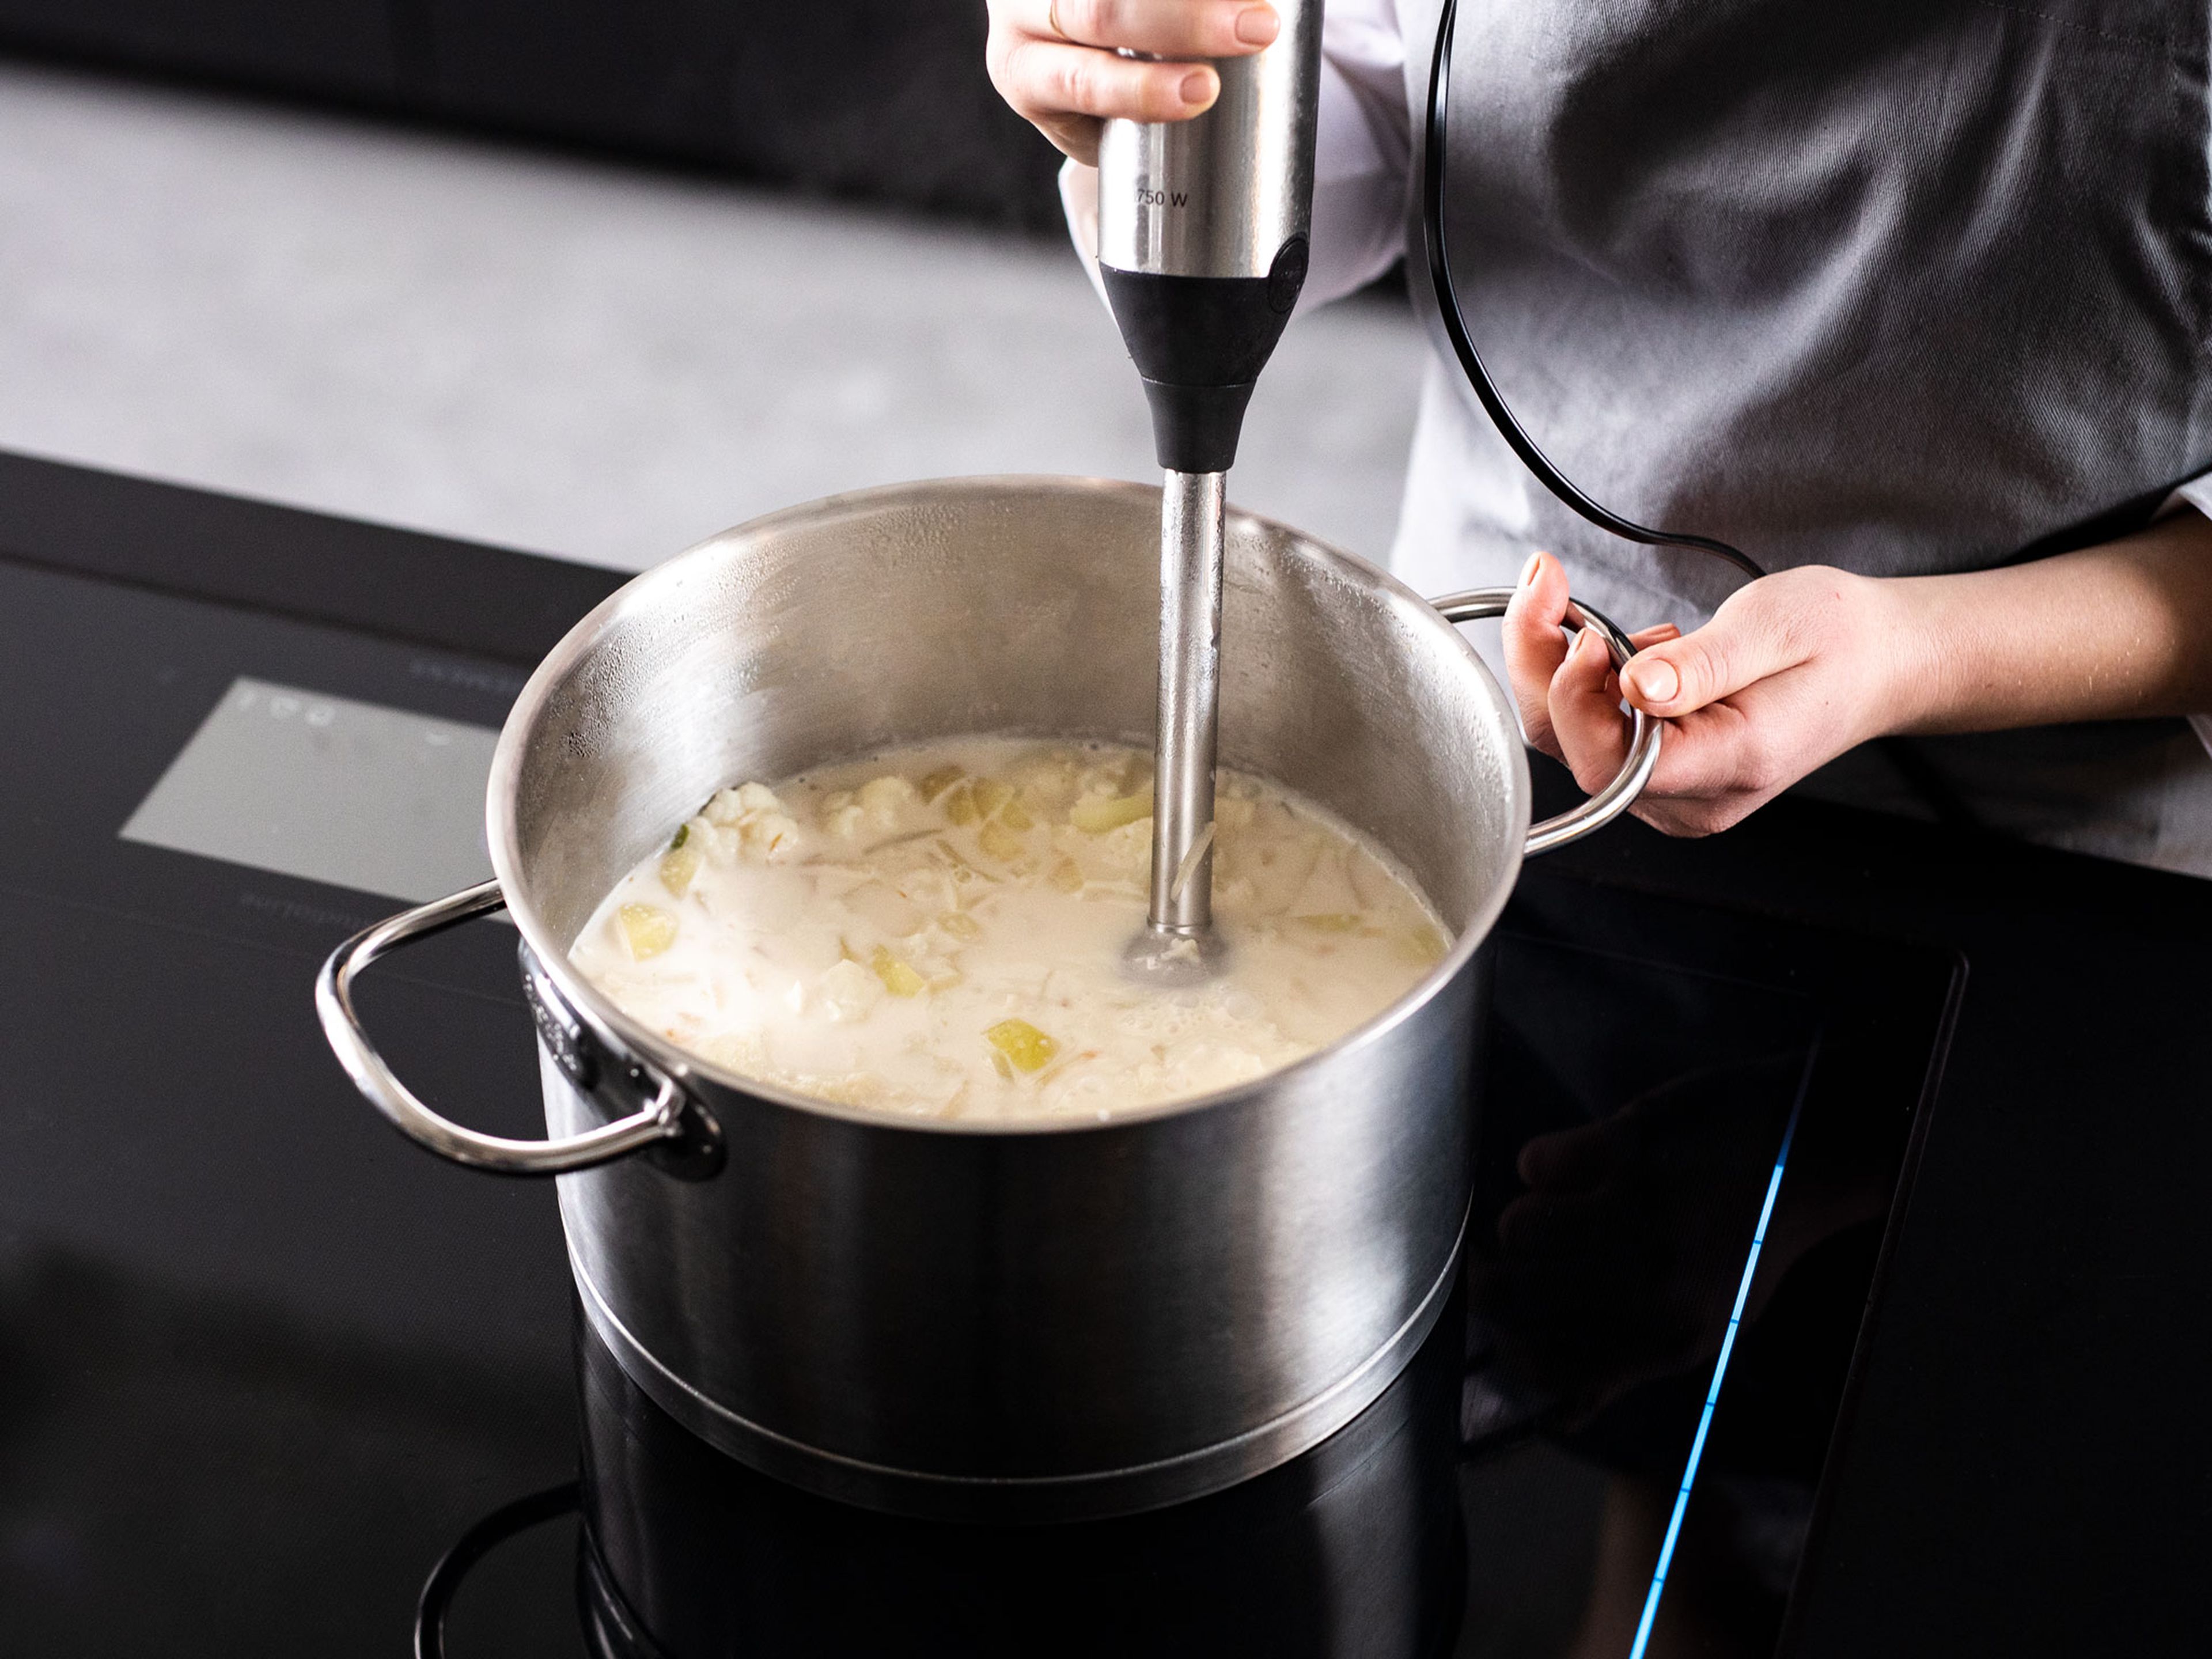 Add coconut water to pot, let simmer for approx. 20 min. Add coconut milk and bring to a boil. Use an immersion blender to blend the soup until smooth. Add fish sauce, season with salt, pepper, and sugar.